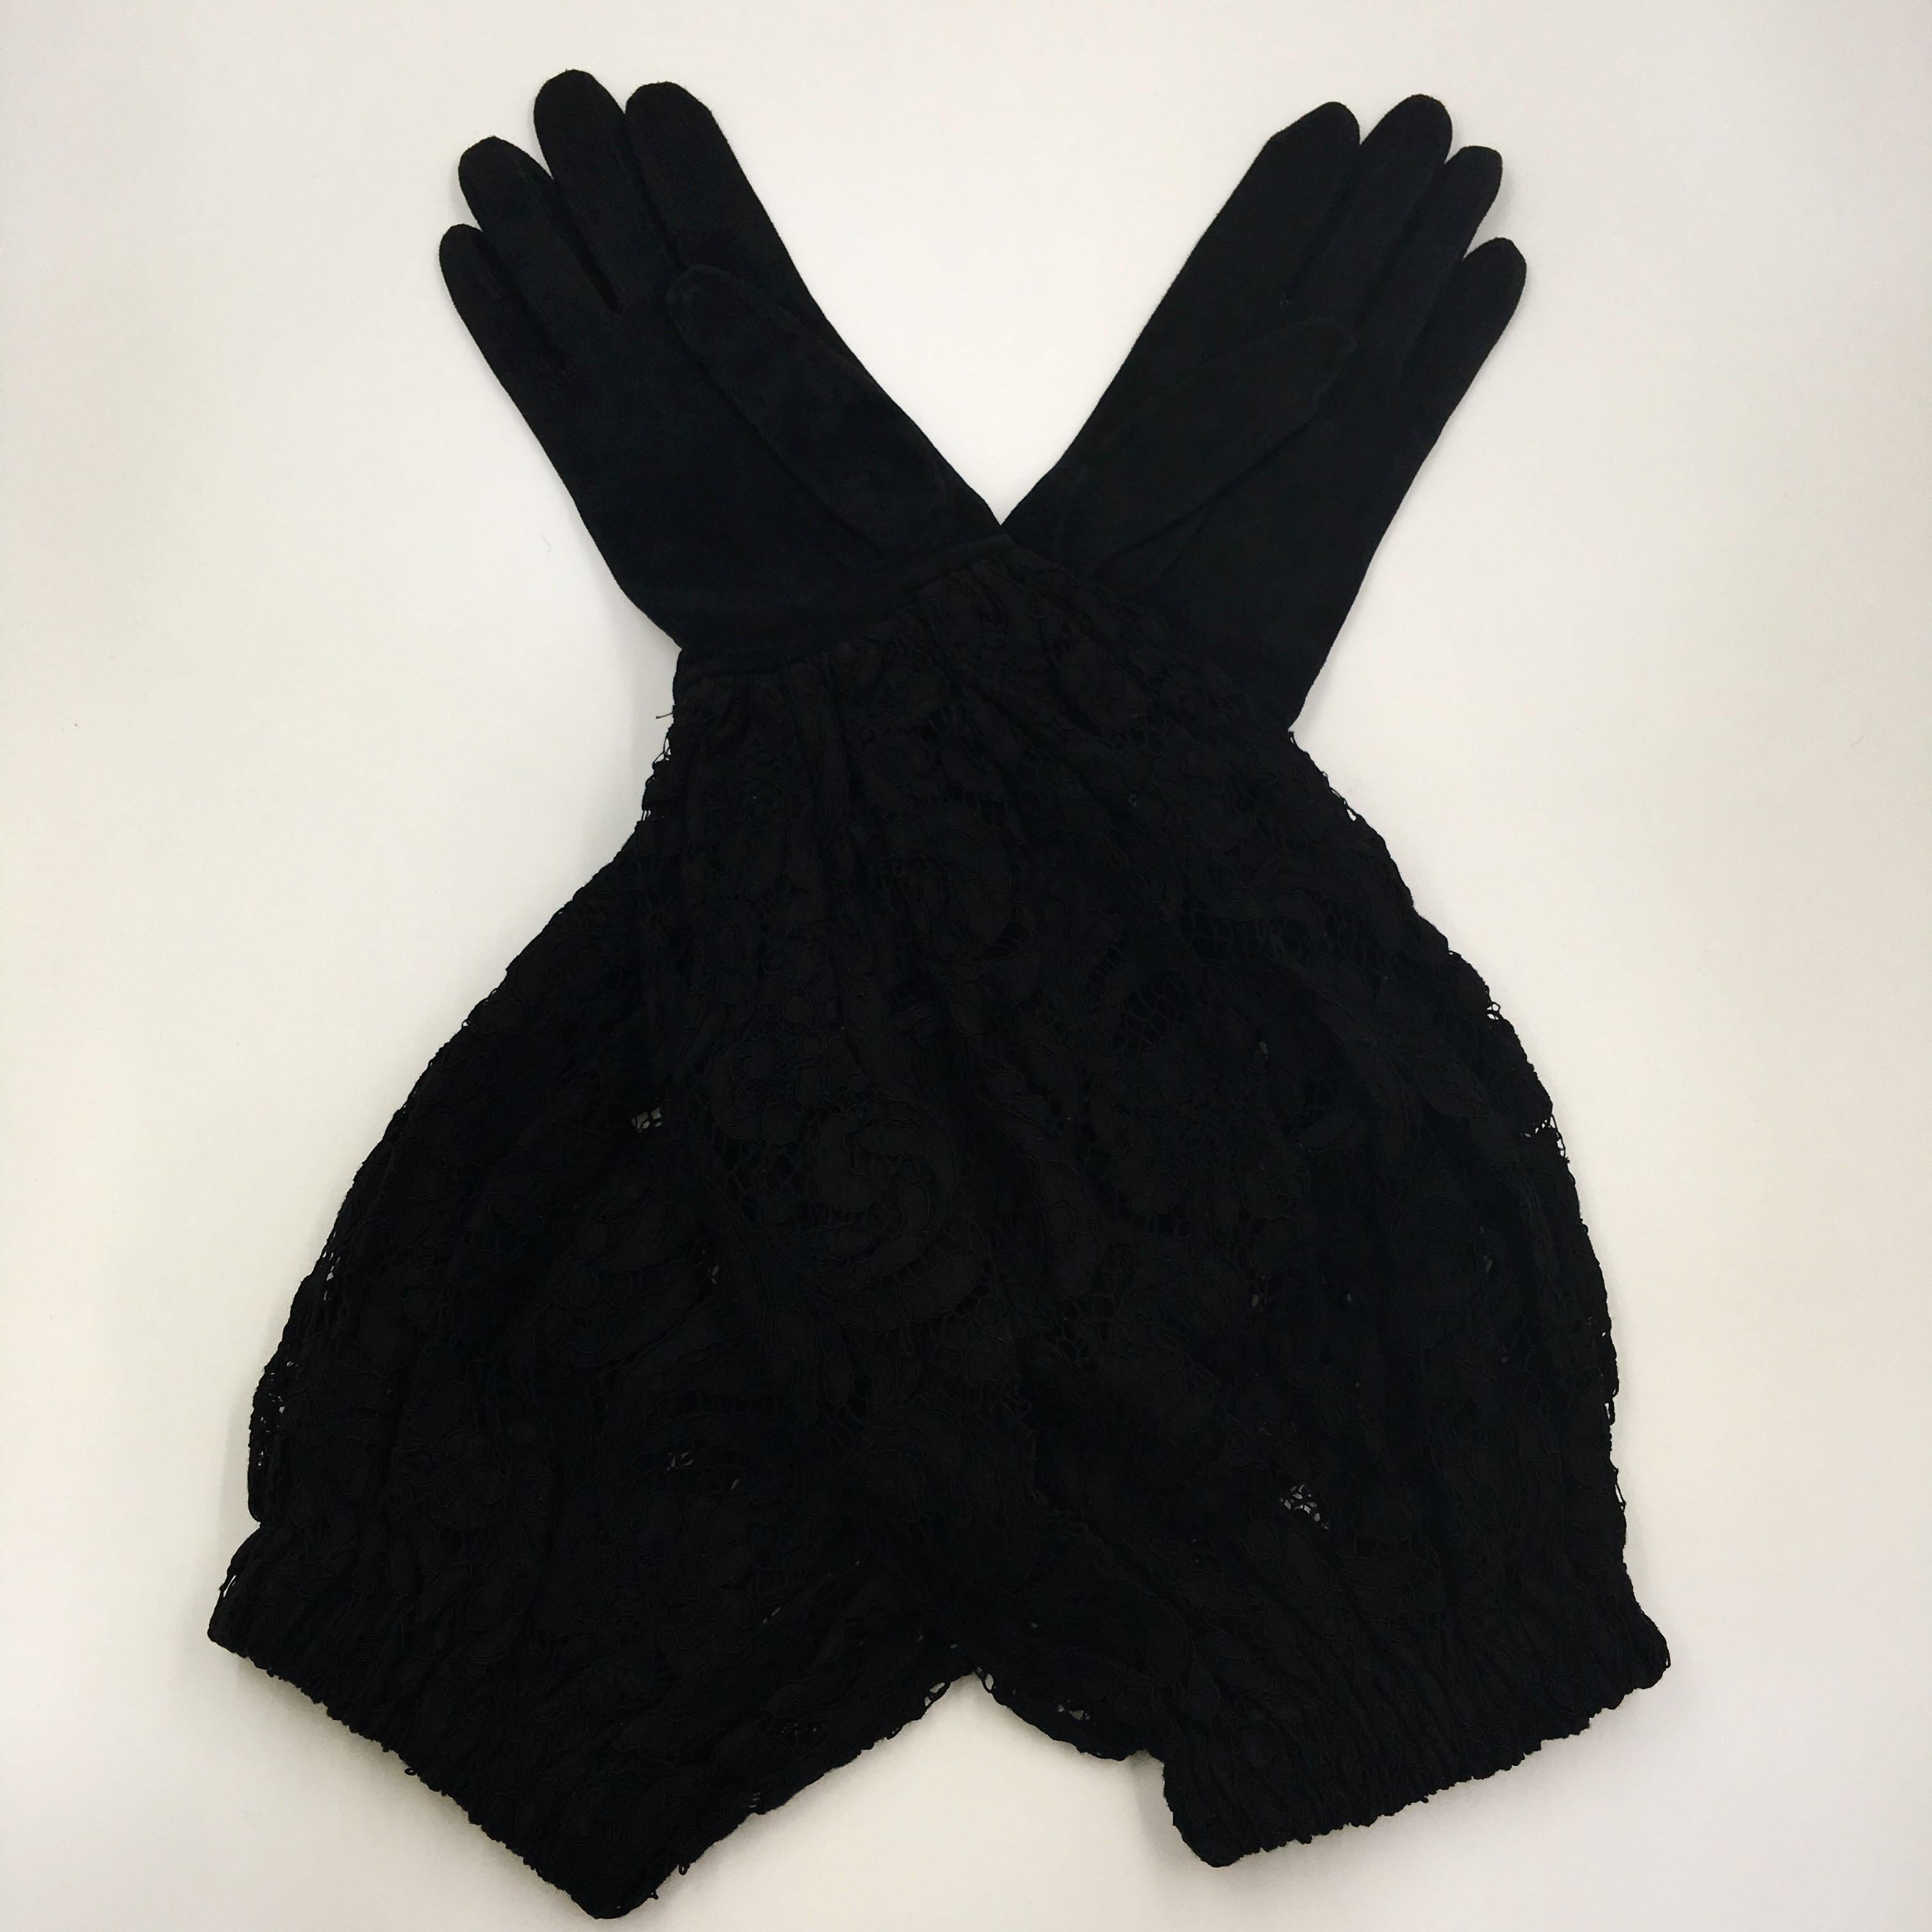 Dior Black Suede and Lace Blouson Elbow Length Glove. Printed inside Christian Dior and Glove Size 8. No woven label inside.  Normal vintage press marks from being folded and boxed. Some photos use a flash to show details. Gloves are a true black